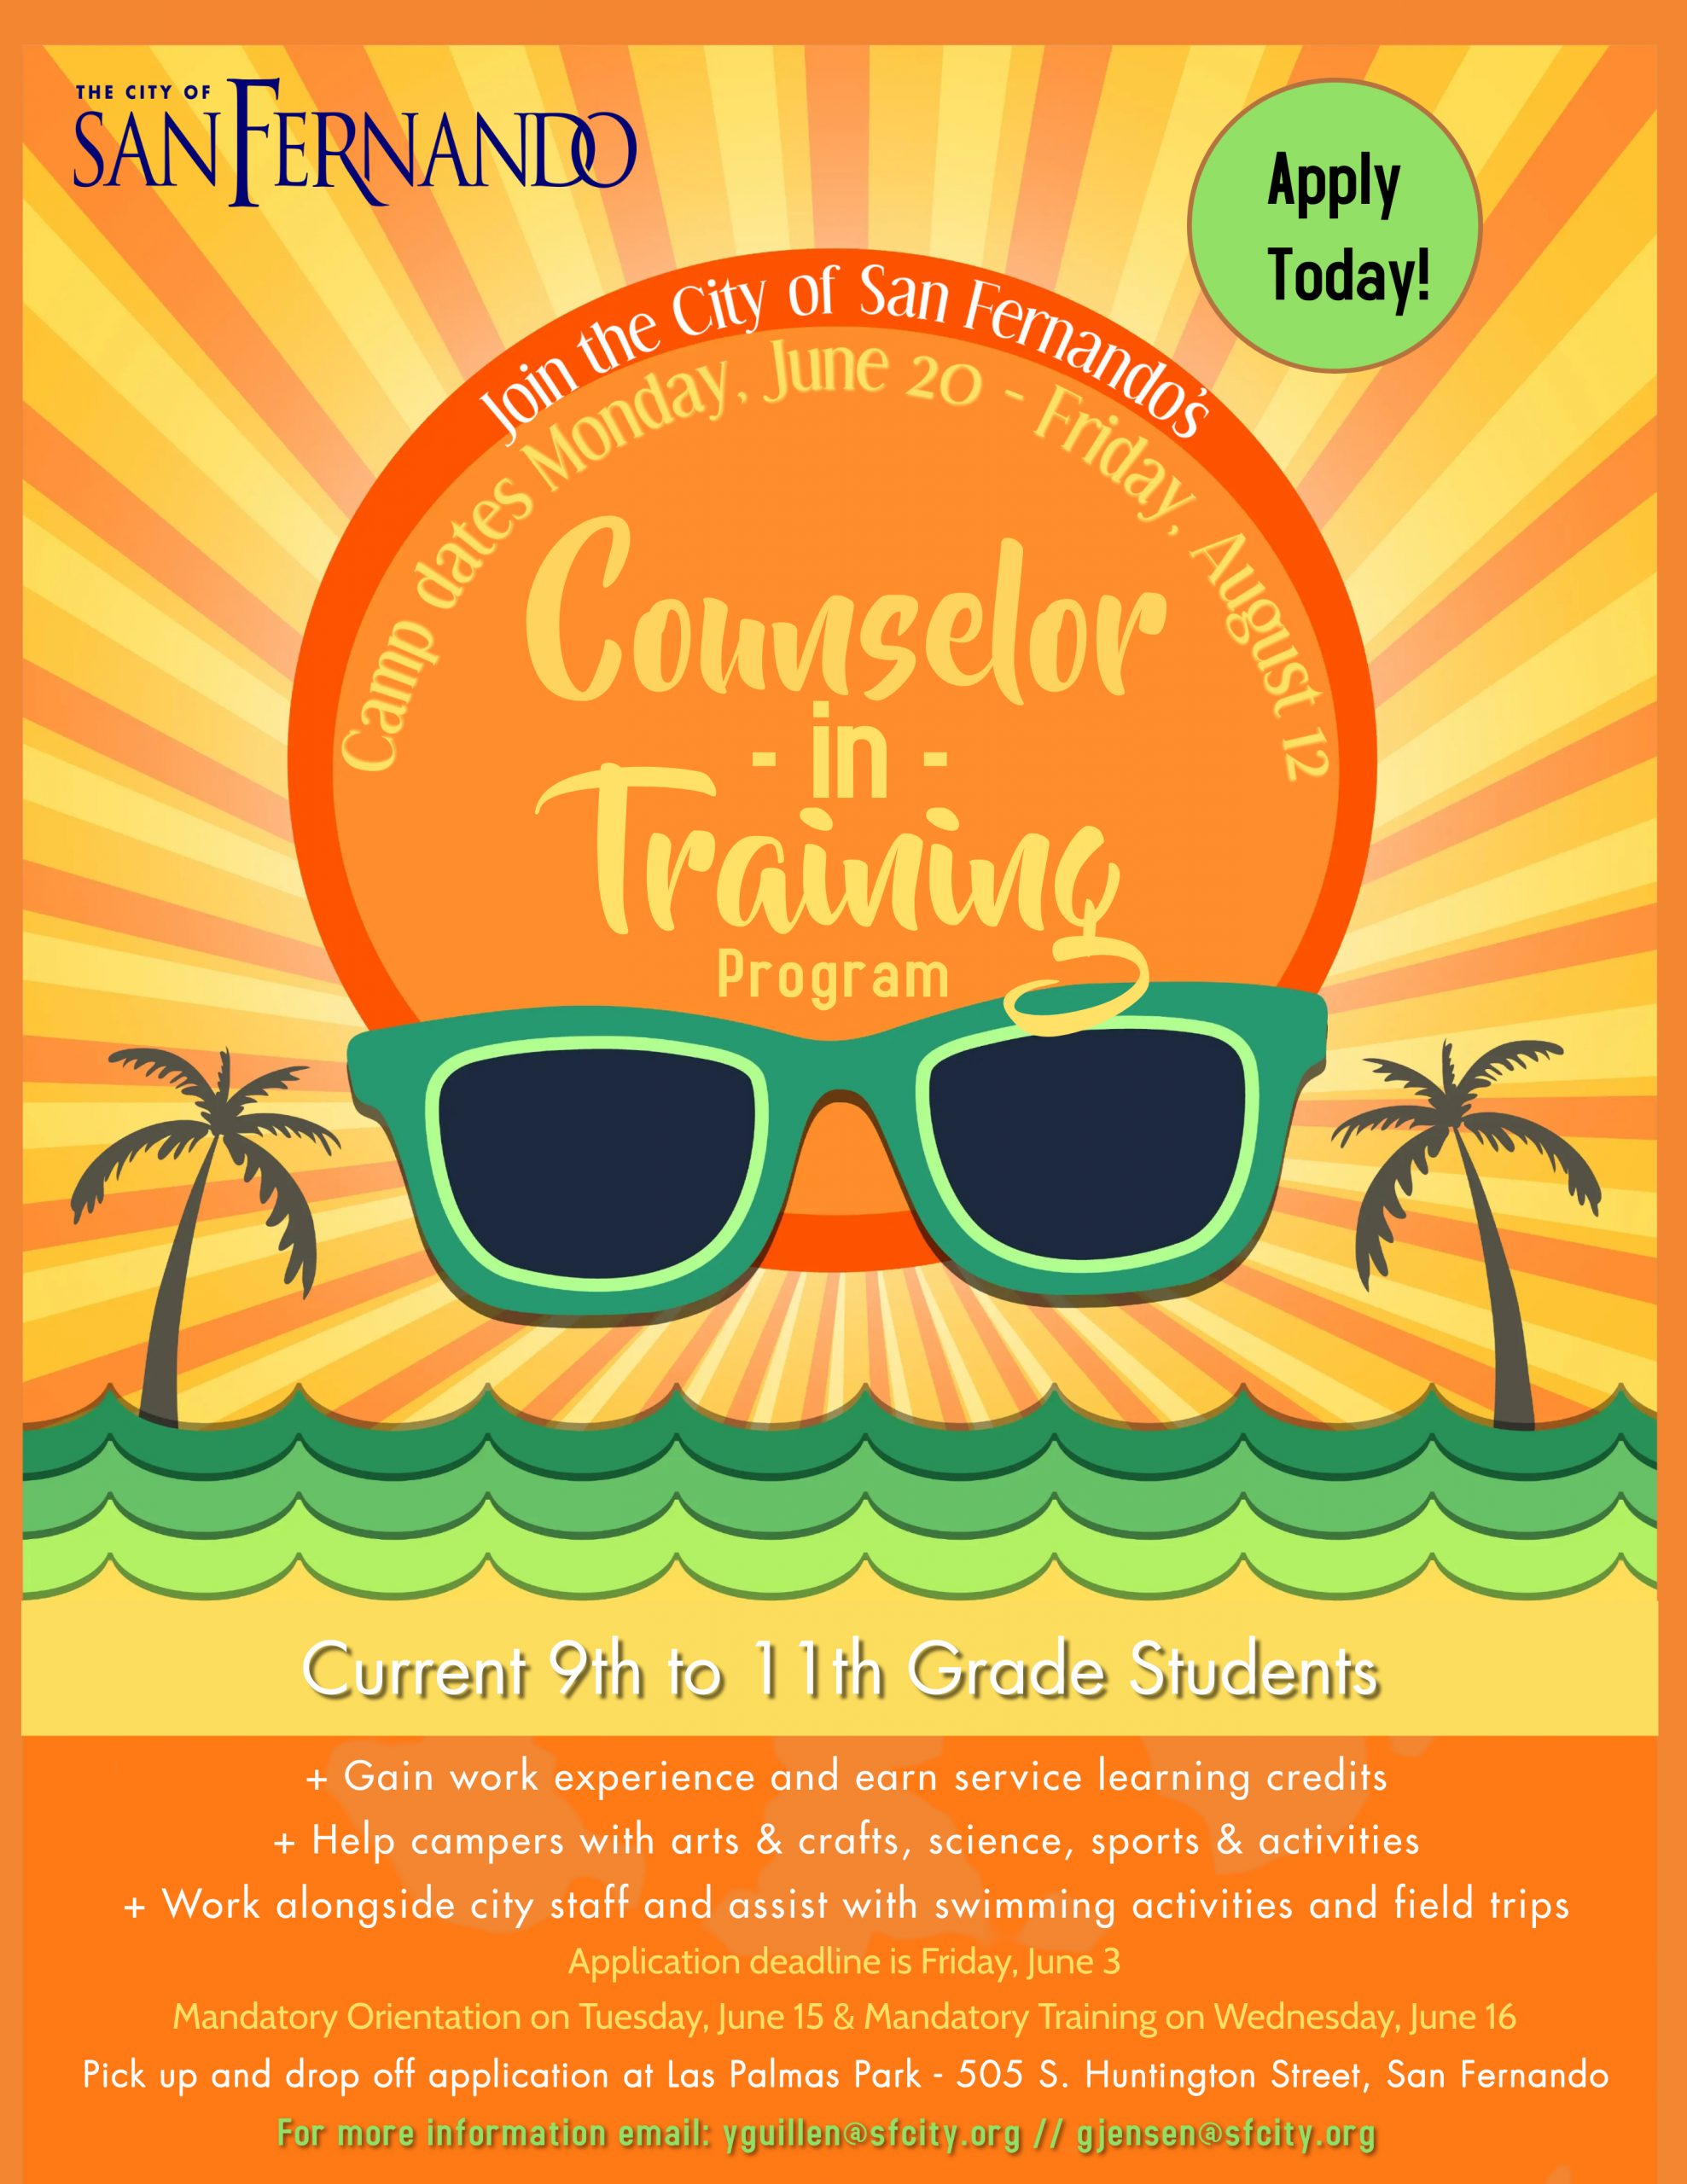 orange and yellow background; sunglasses, palm trees, City of San Fernando, Counselors in Training